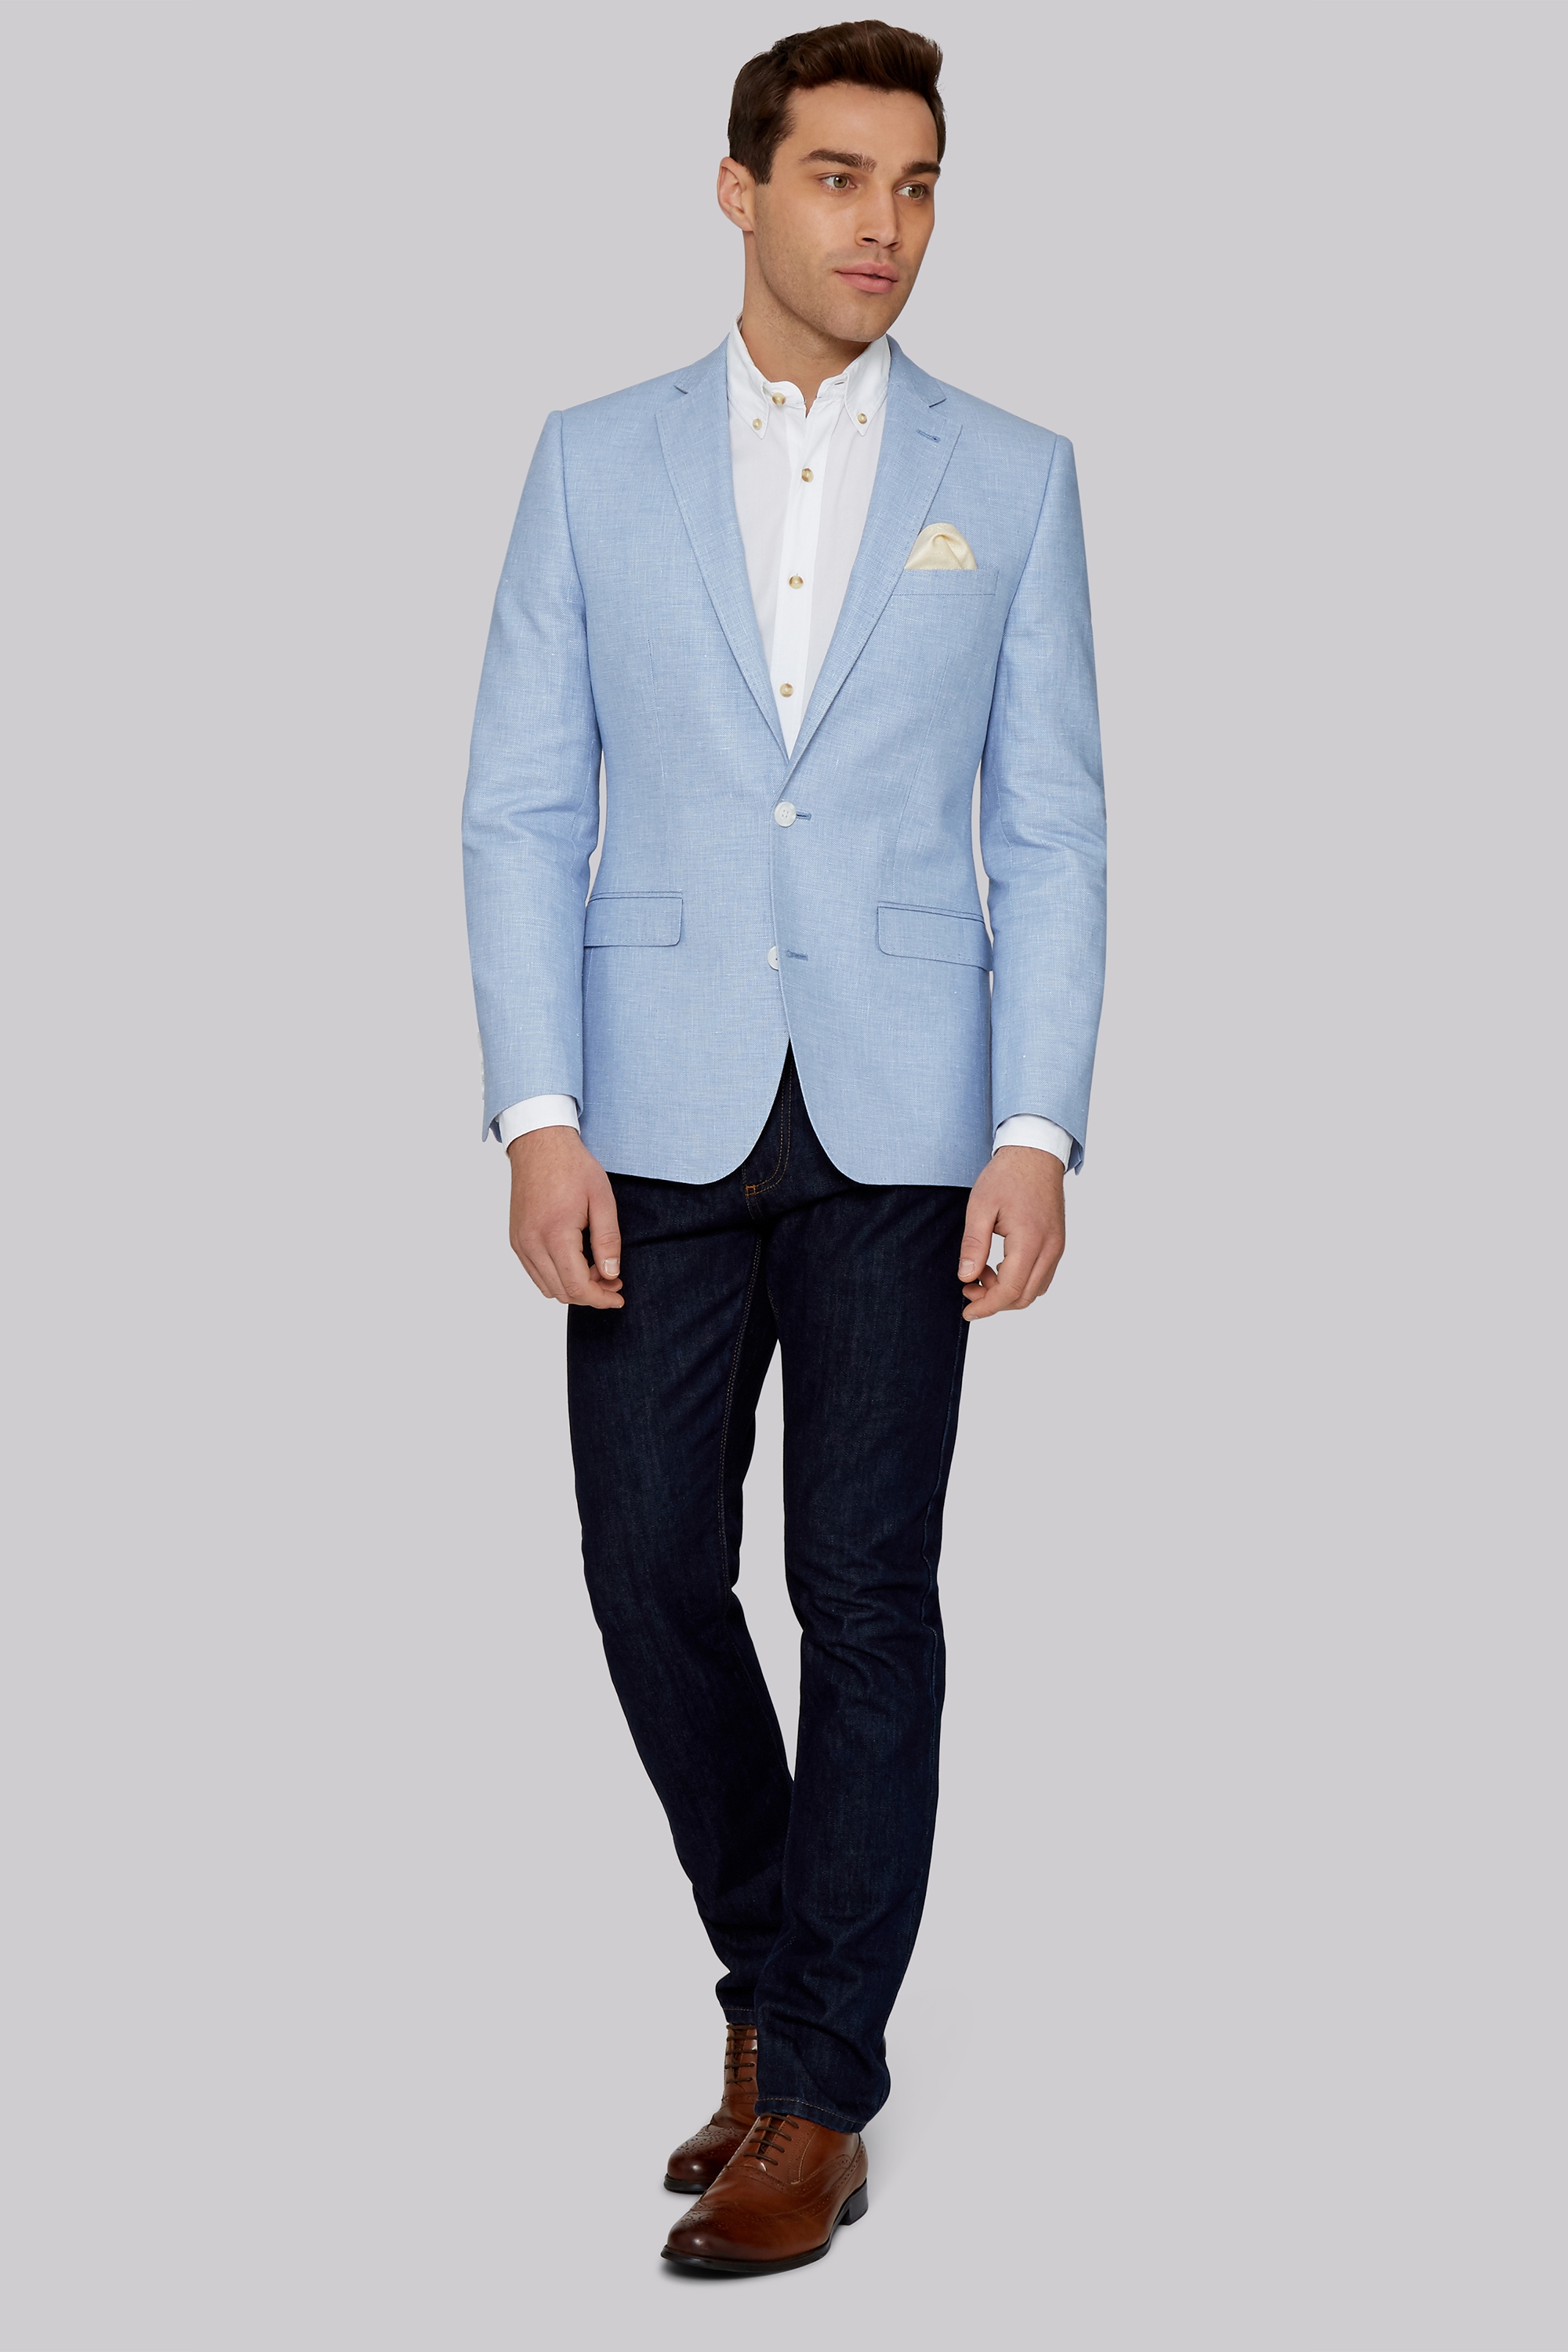 Suit and jeans fashion